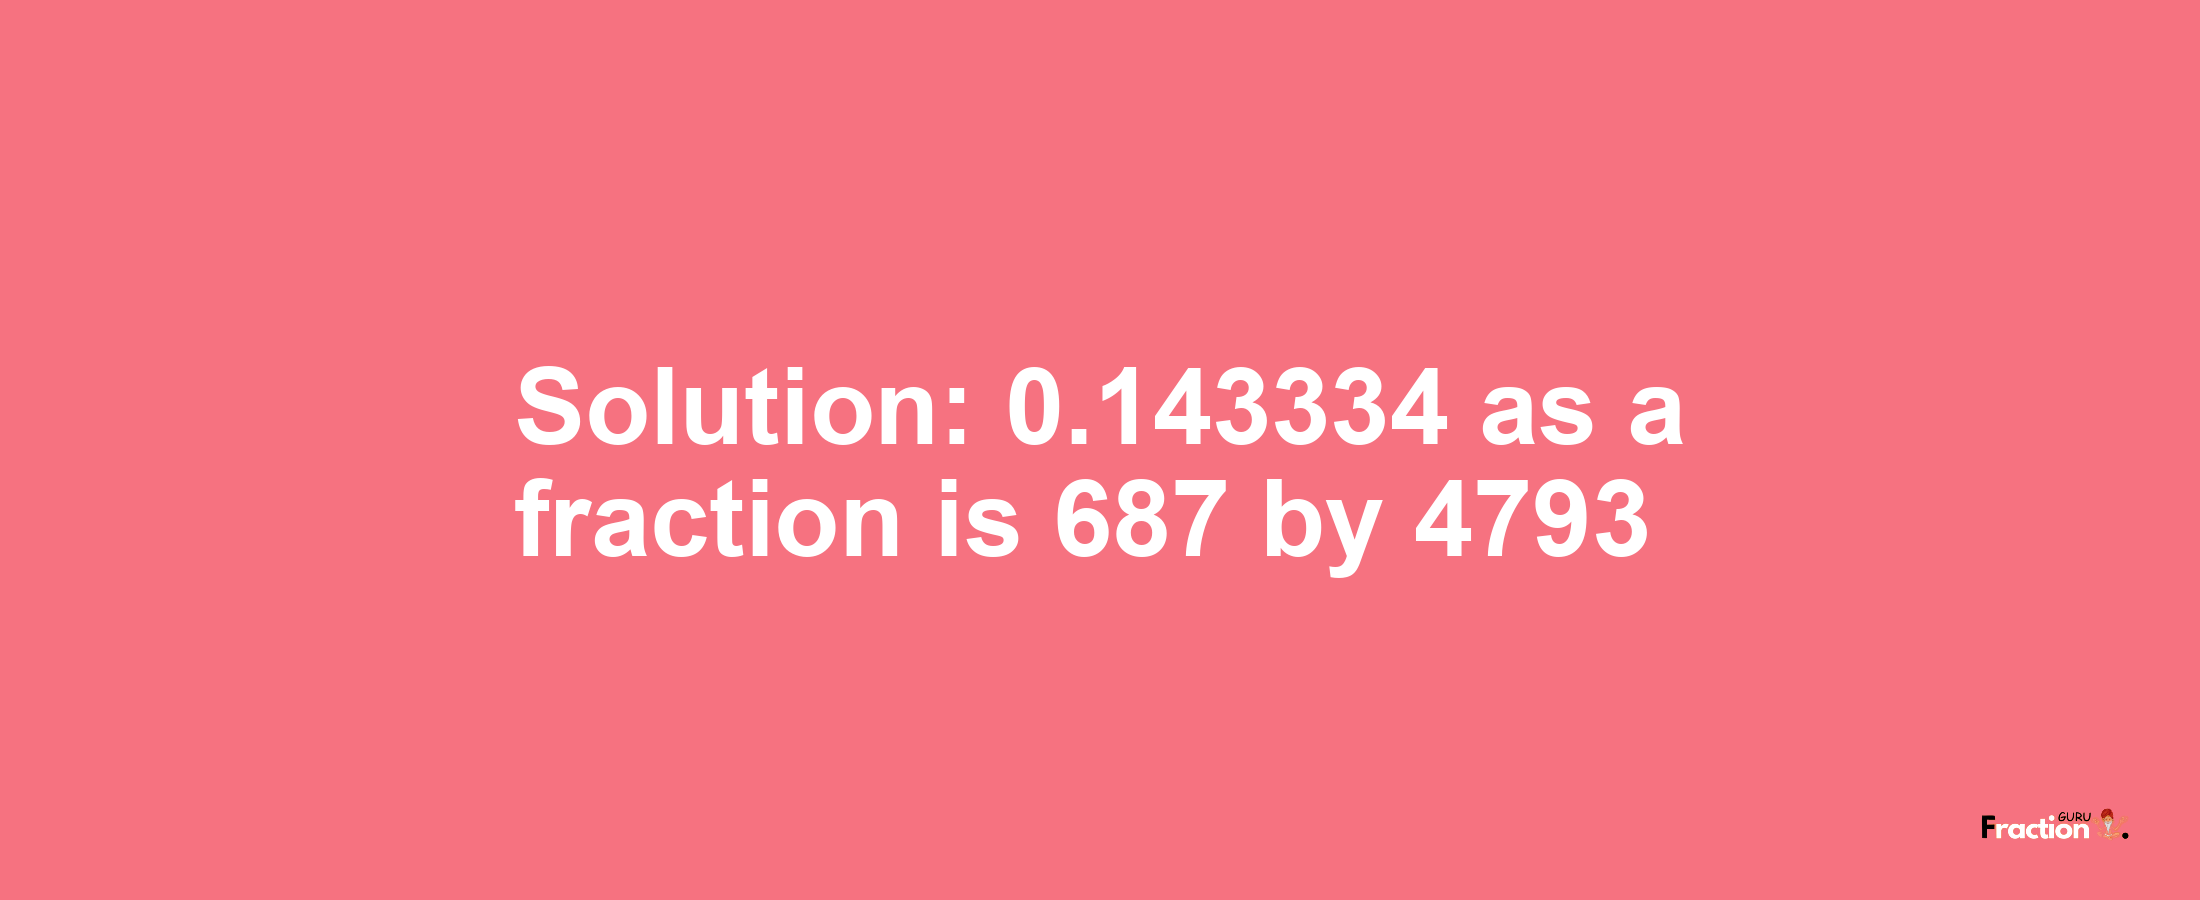 Solution:0.143334 as a fraction is 687/4793